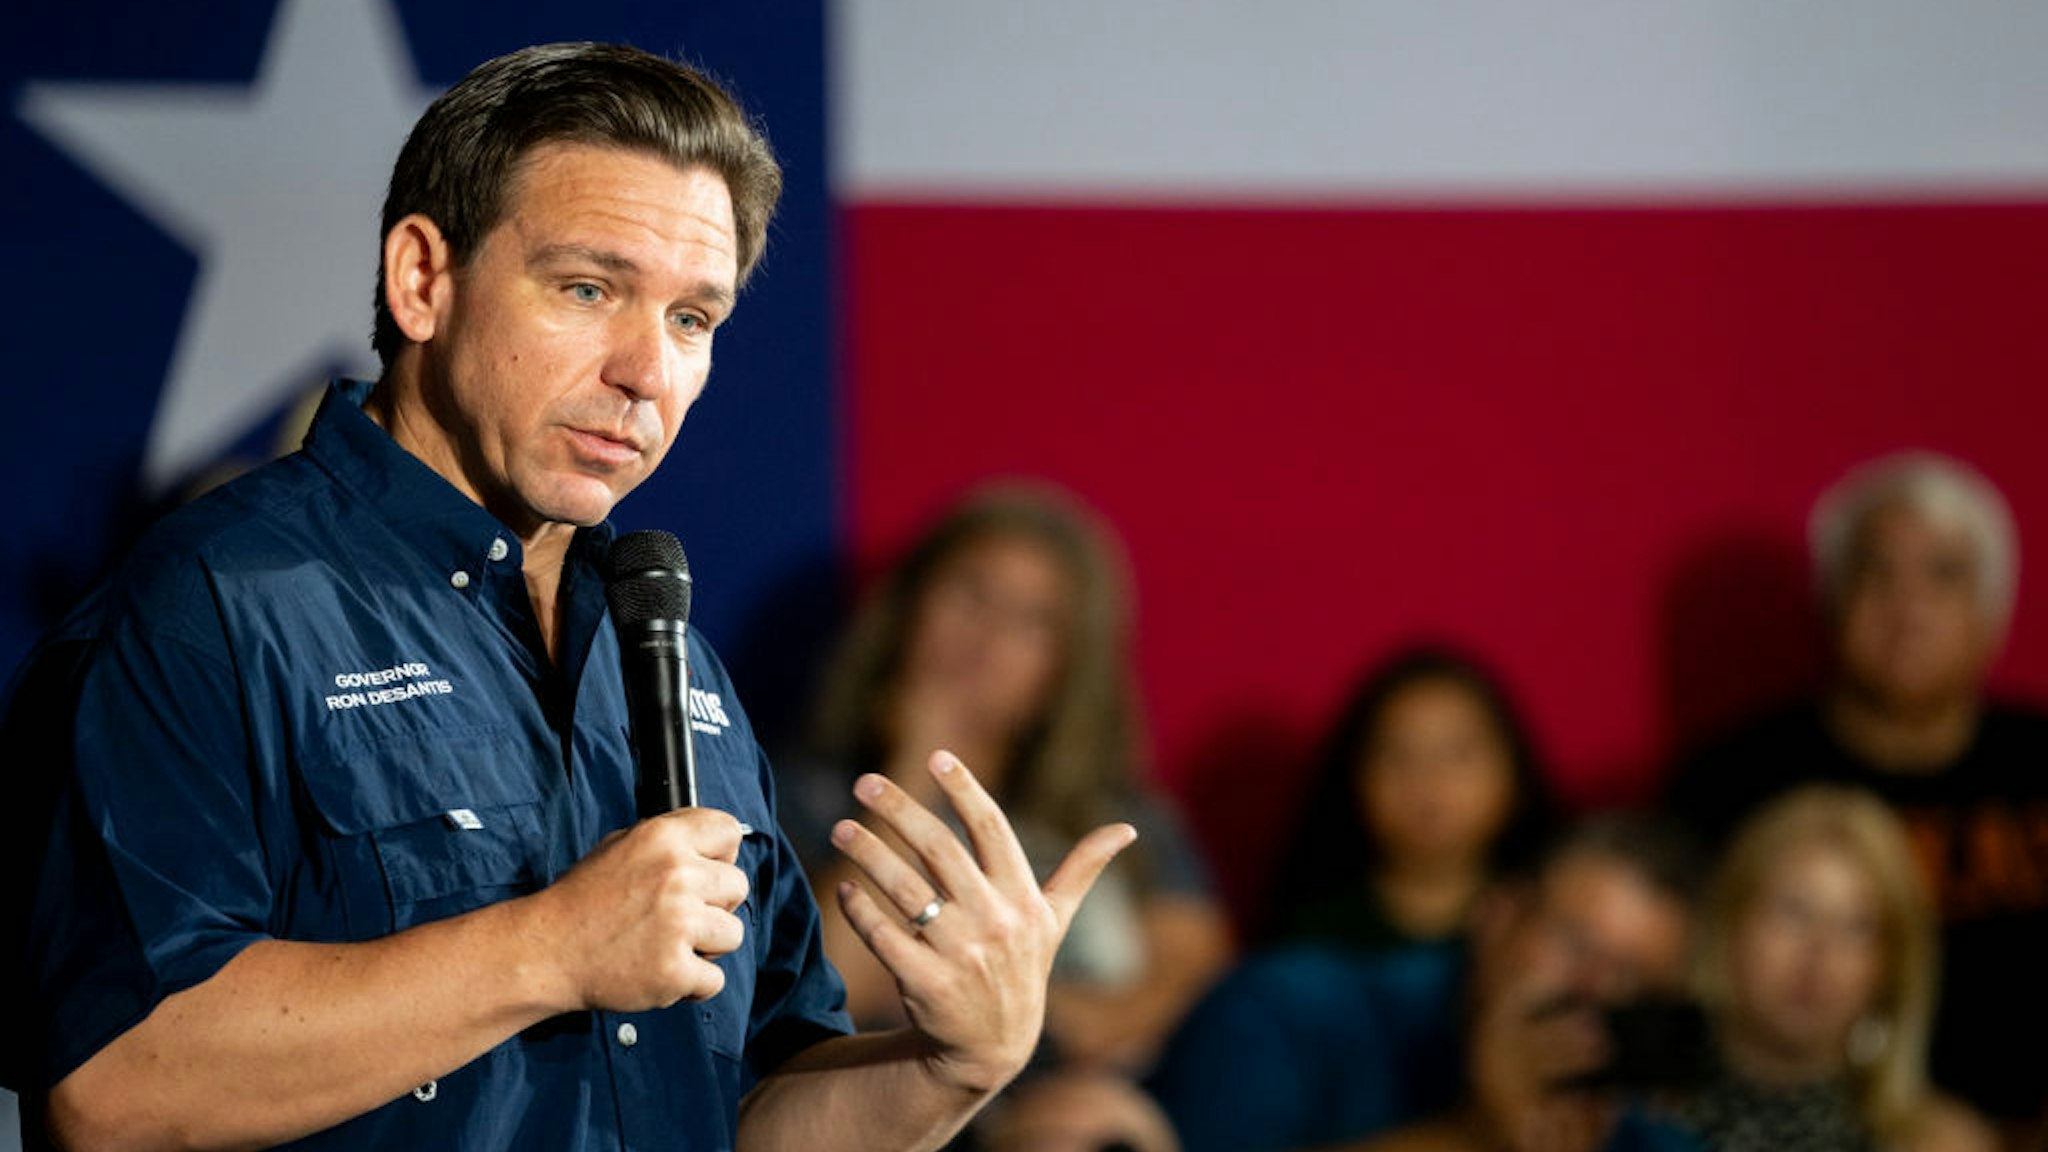 EAGLE PASS, TEXAS - JUNE 26: Republican presidential candidate, Florida Gov. Ron DeSantis speaks during a campaign rally on June 26, 2023 in Eagle Pass, Texas. Gov. DeSantis engaged residents and voters while speaking about border security issues at the event. (Photo by Brandon Bell/Getty Images)